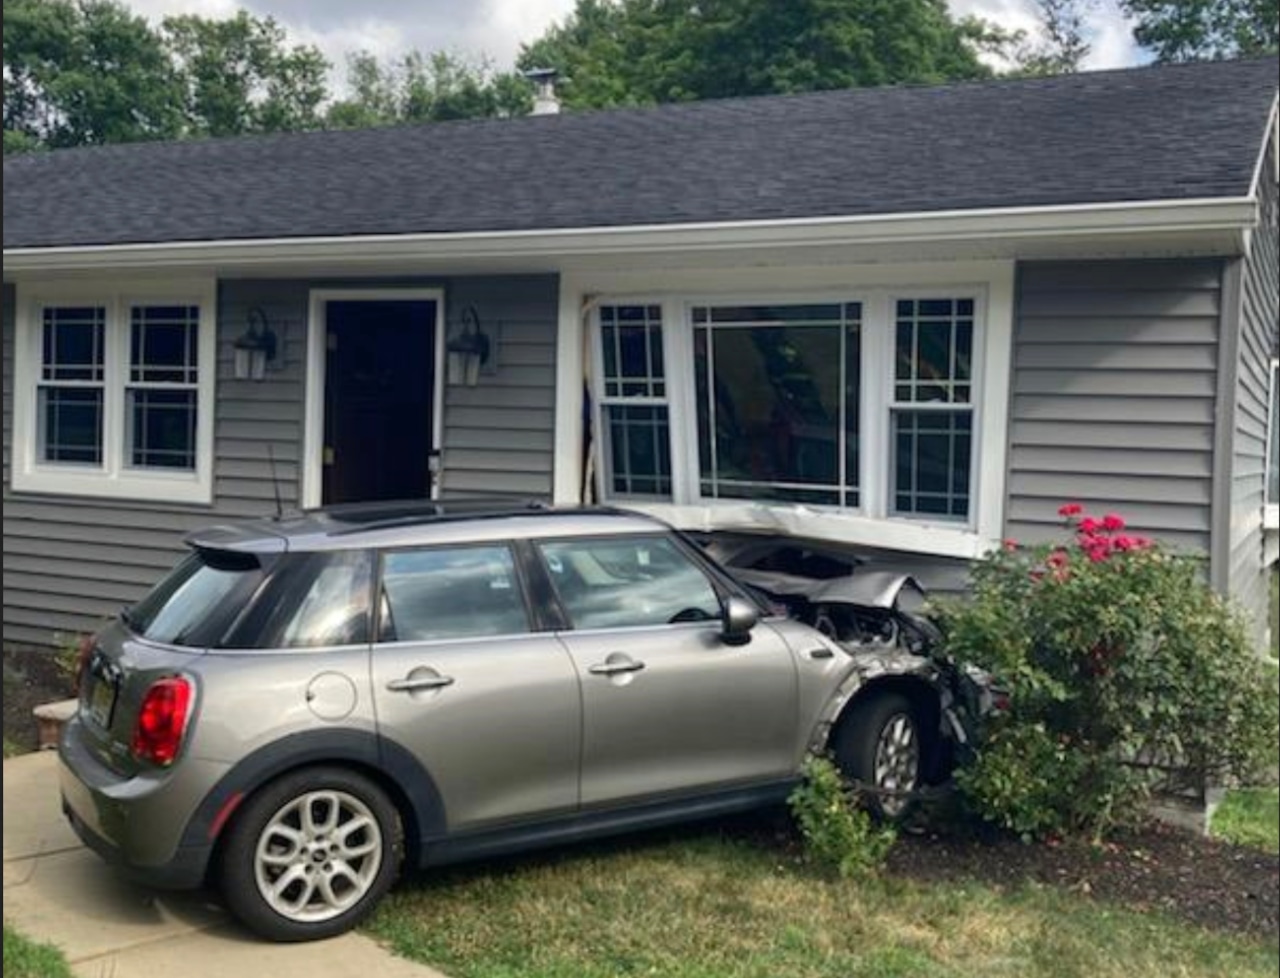 Cars strike houses in 2 separate crashes in N.J. town [Video]